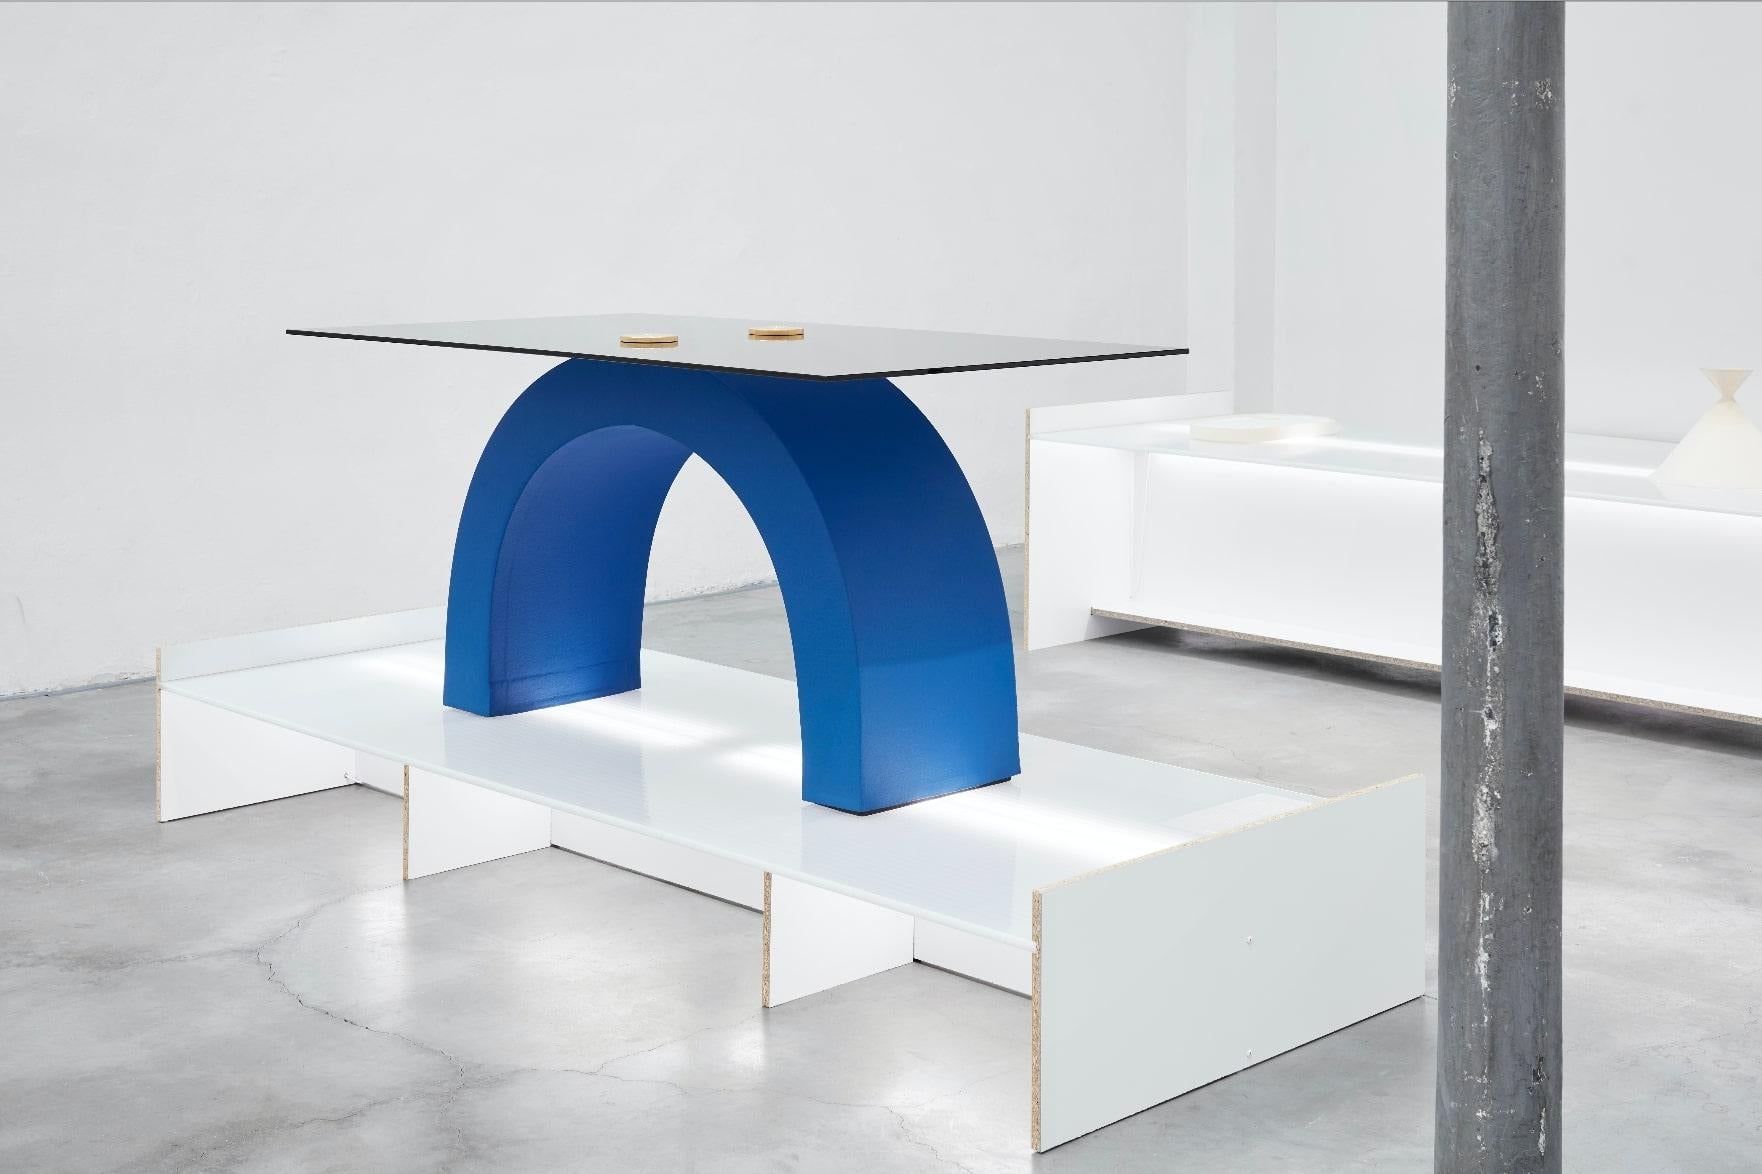 Antithesis table by Onno Adriaanse, 2022
Edition: limited edition of 8.
Dimensions: H 90 x W 160 x D 75 cm
Materials: brass, float glass, steel, foam, polyurethaan coating.
Available in any colour.

Antithesis Table creates visual tension,